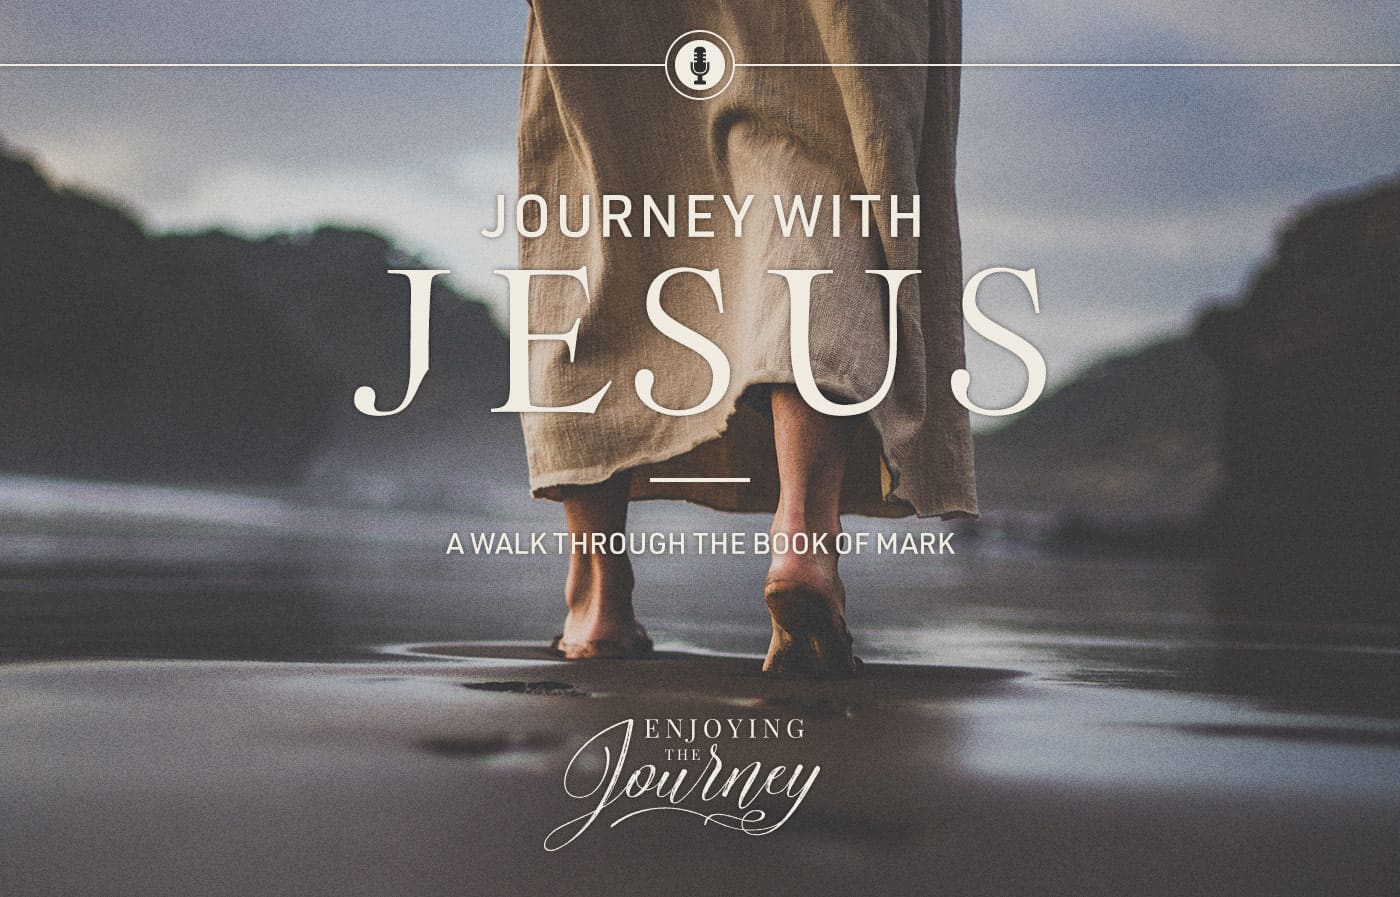 Is There Anything Between You and Jesus?